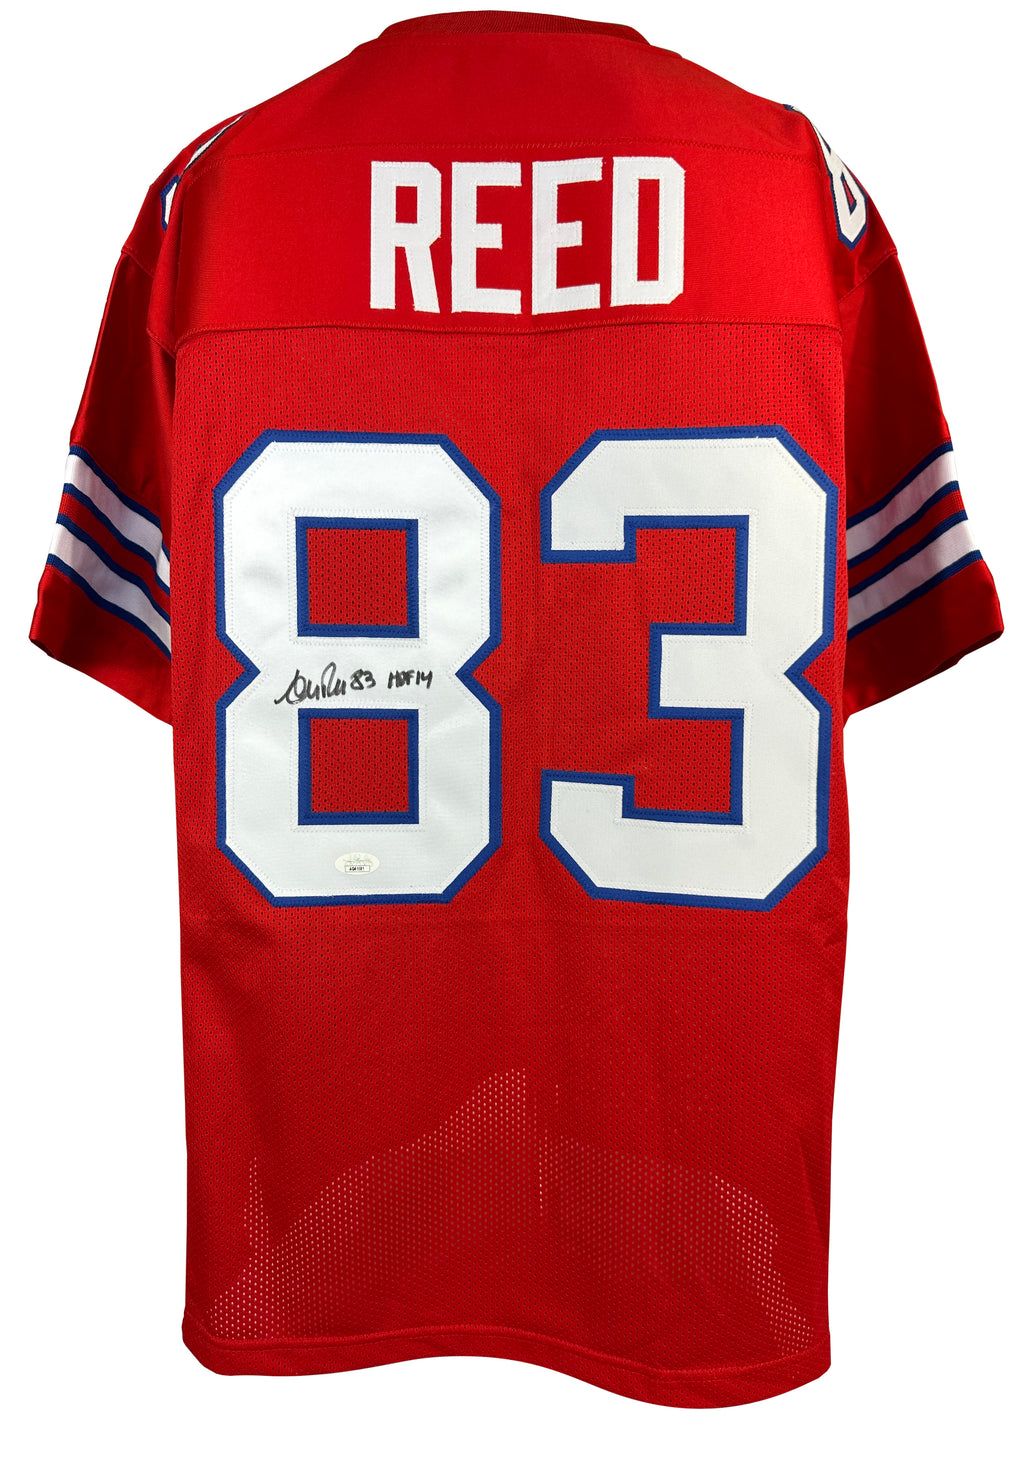 ANDRE REED AUTOGRAPHED SIGNED INSCRIBED RED PRO STYLE JERSEY